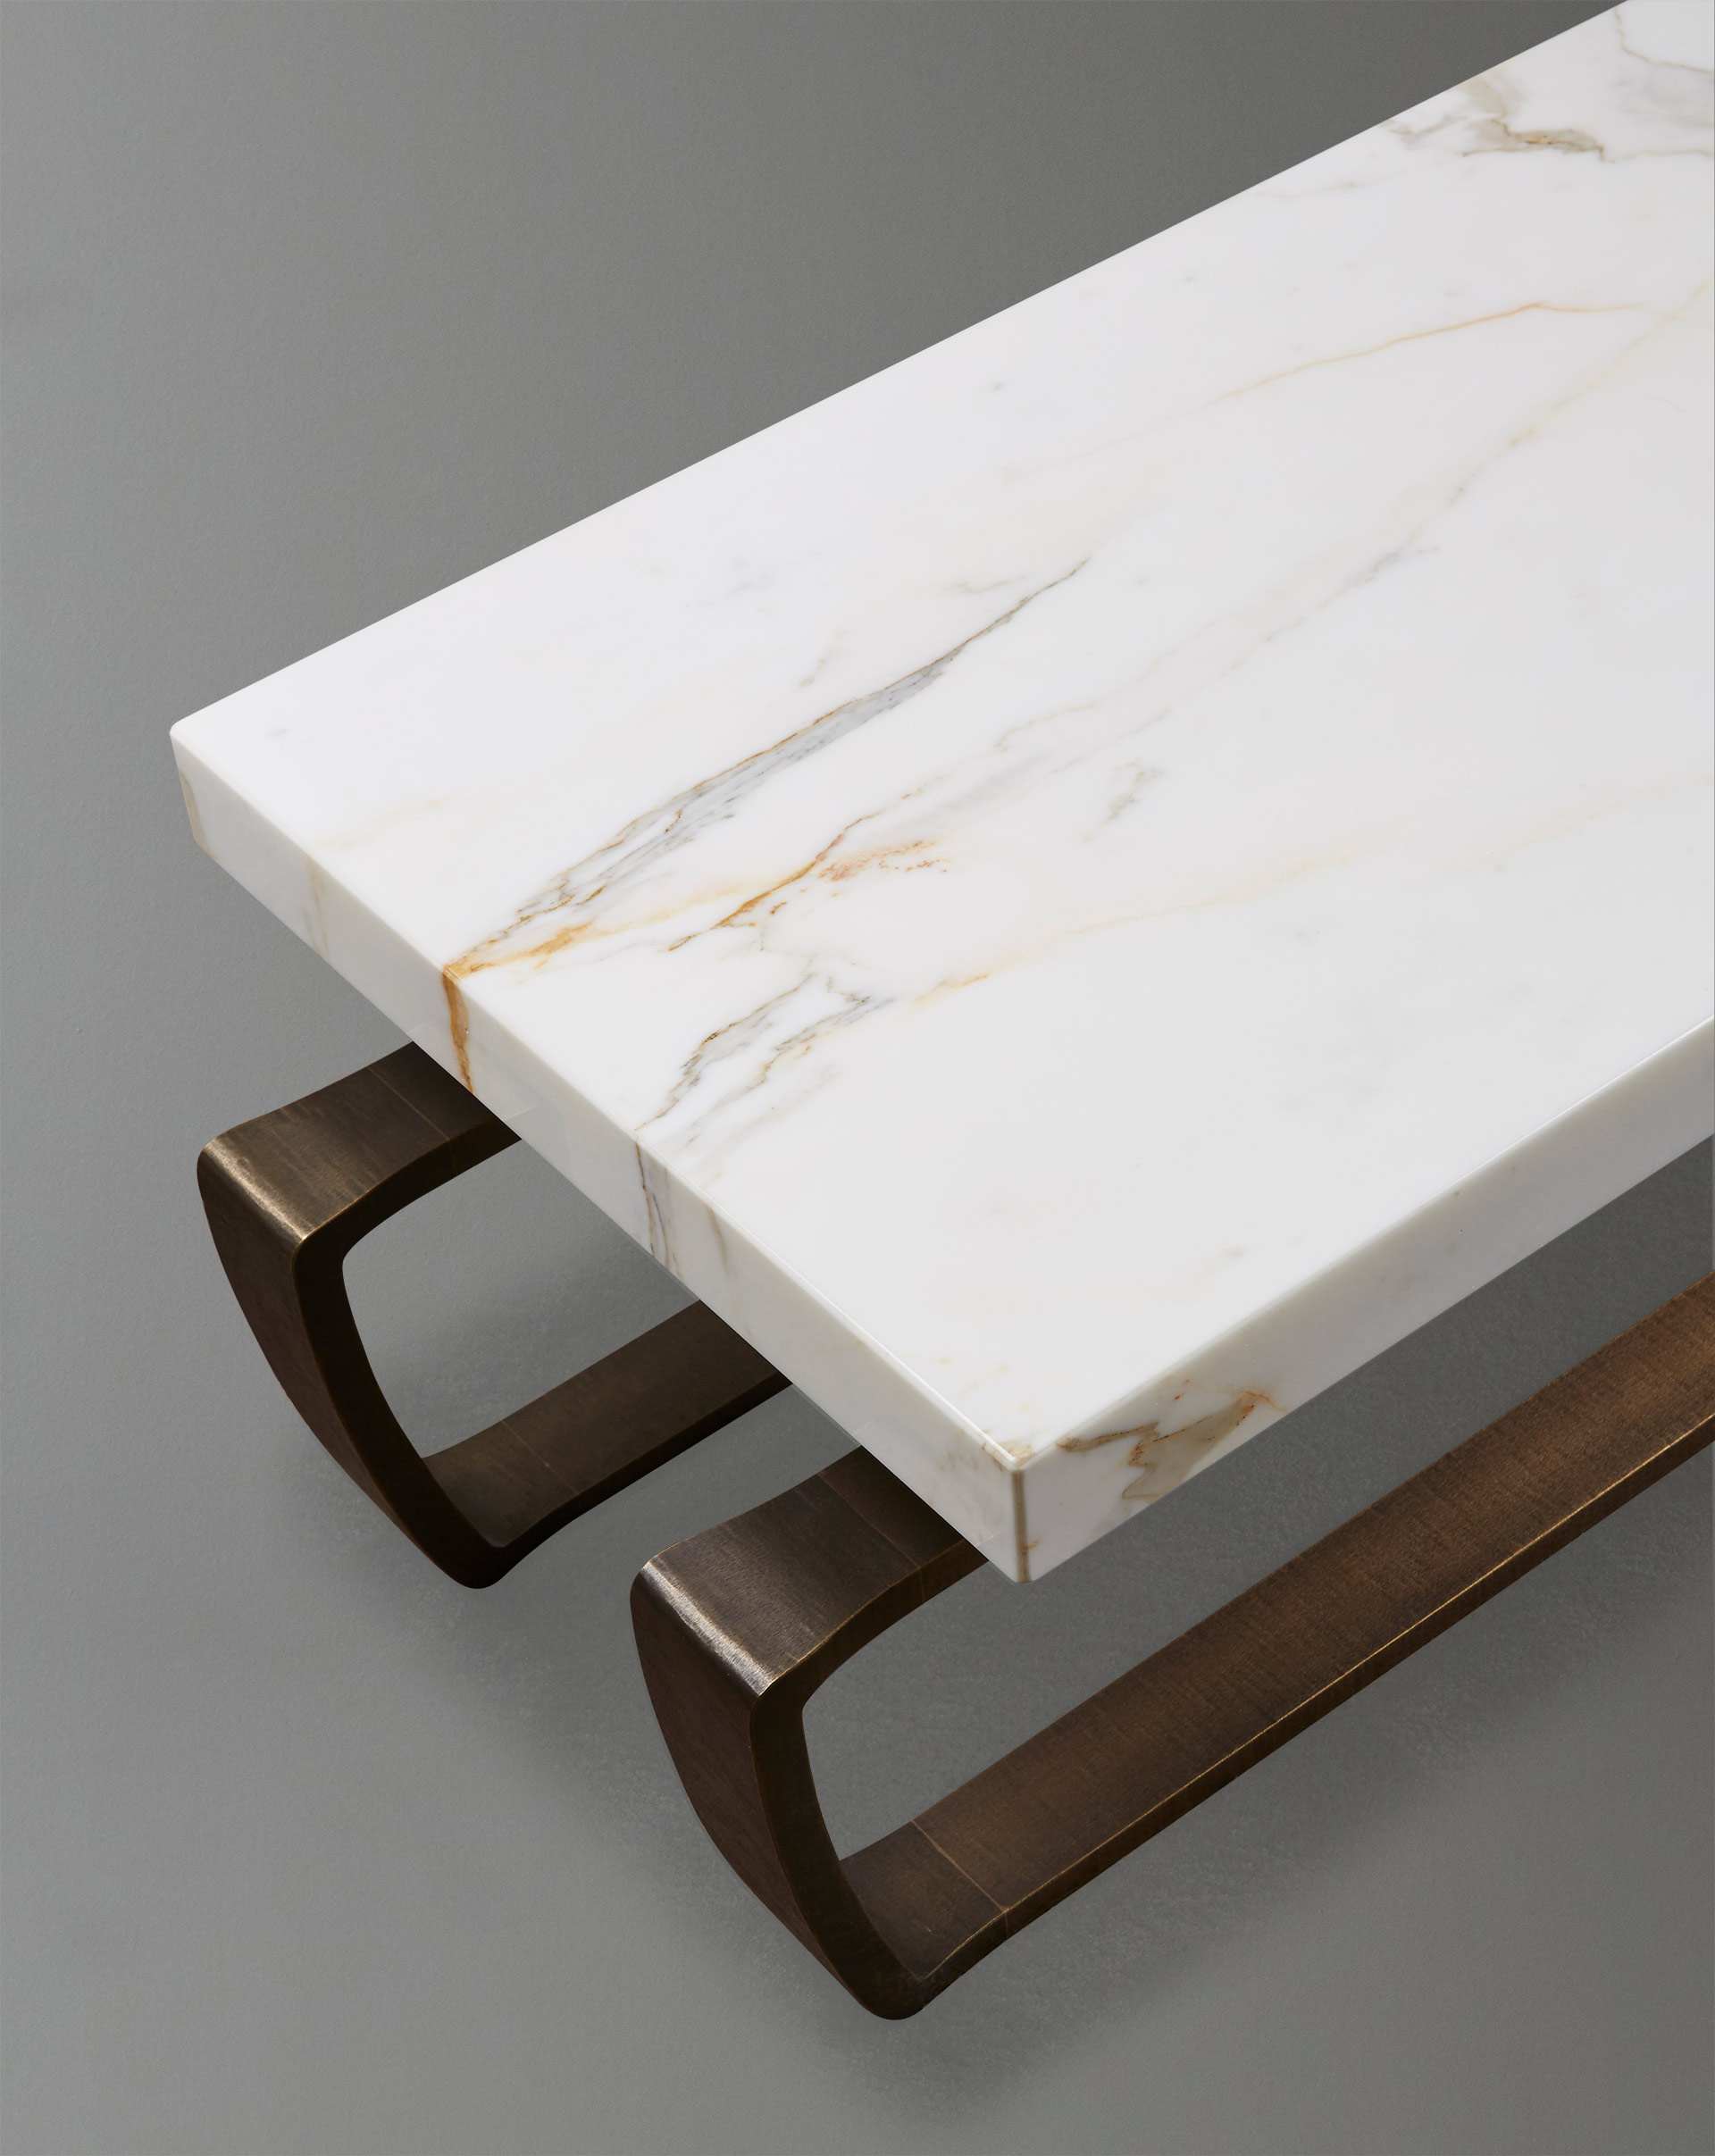 Marble top detail of Saint Moritz, a coffee table with a bronze base, from Promemoria's catalogue | Promemoria